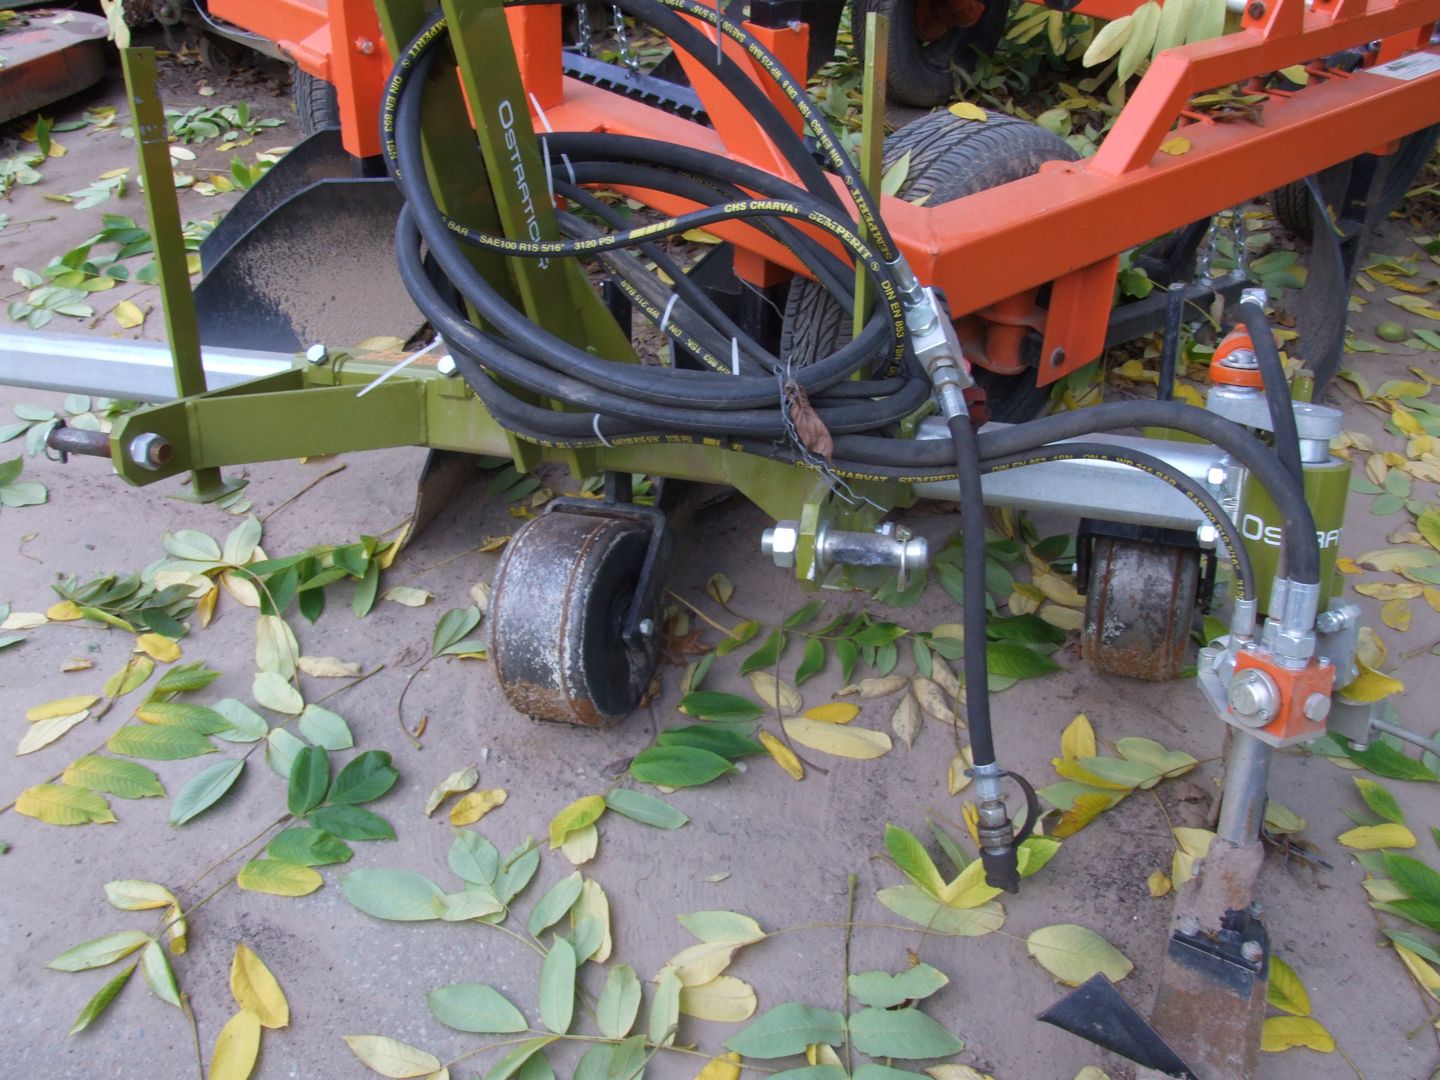 one side cultivator for rows